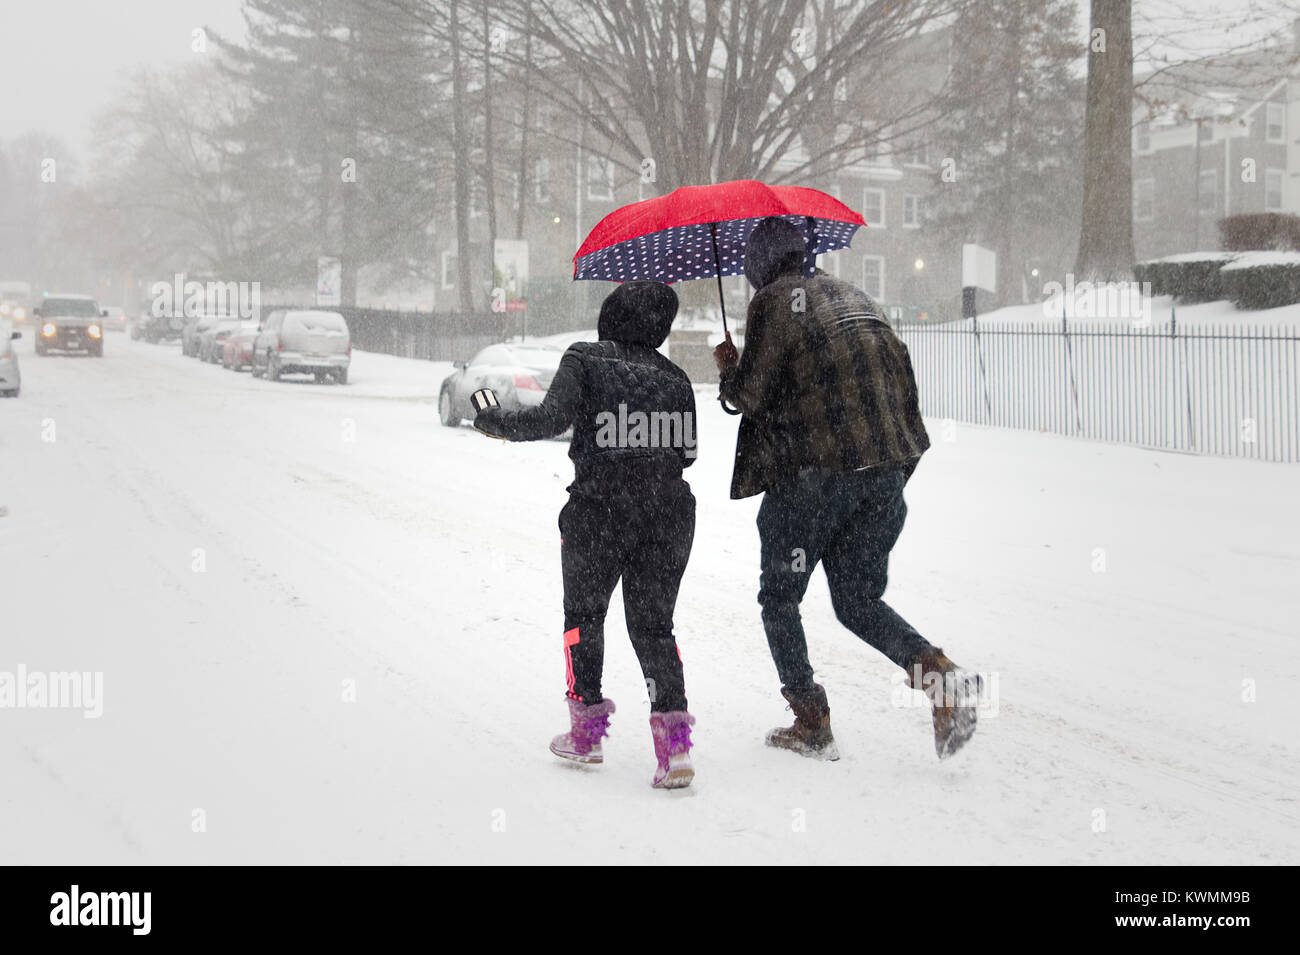 Philadelphia, PA, USA - January 4, 2018: A couple with a red umbrella braves icy gusts as area residents brace for a 'Bomb Cyclone' winter storm in Northwest Philadelphia. Stock Photo